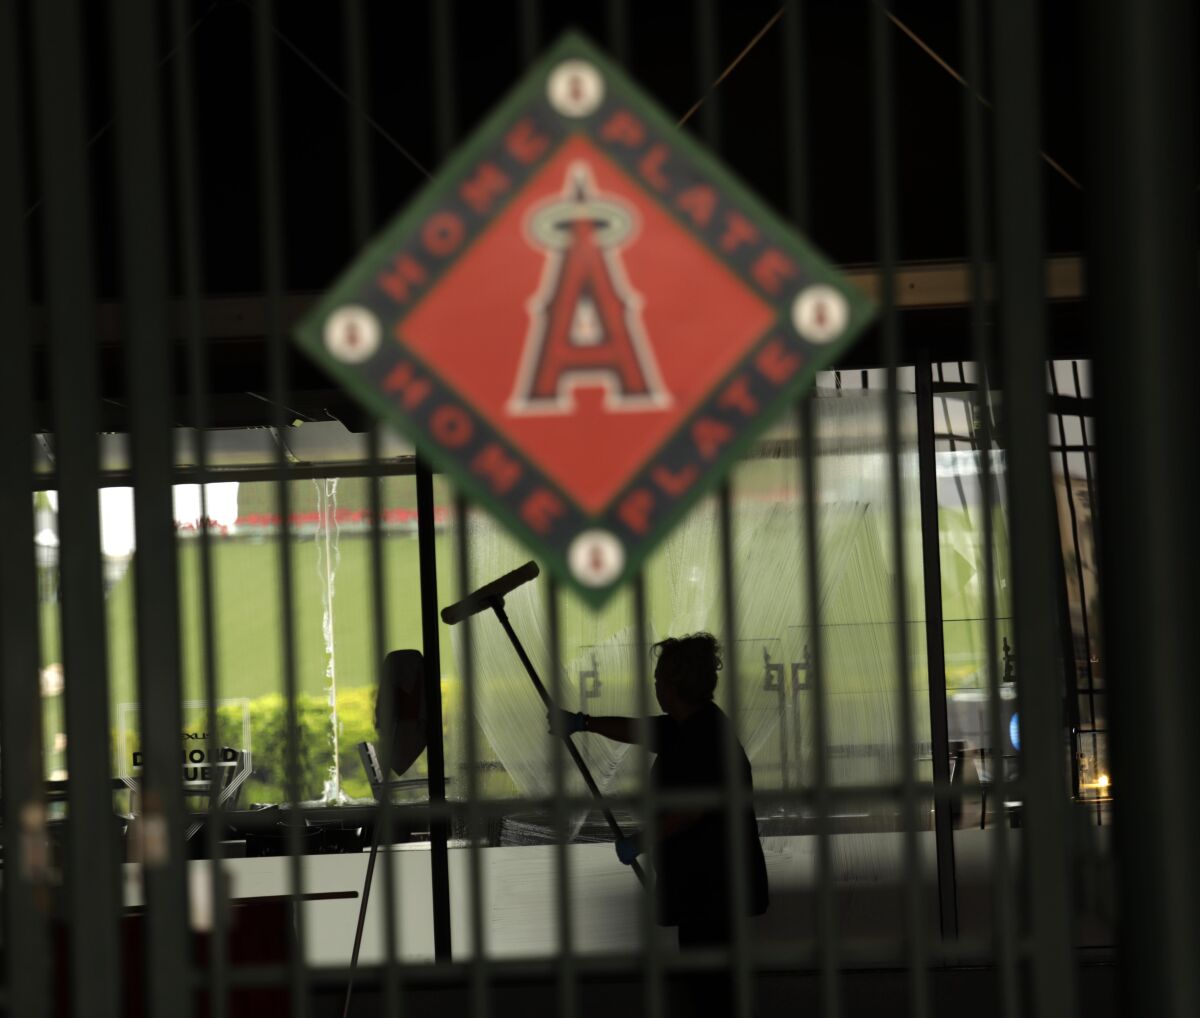 A worker washes a window inside Angel Stadium in Anaheim on May 23, 2022.